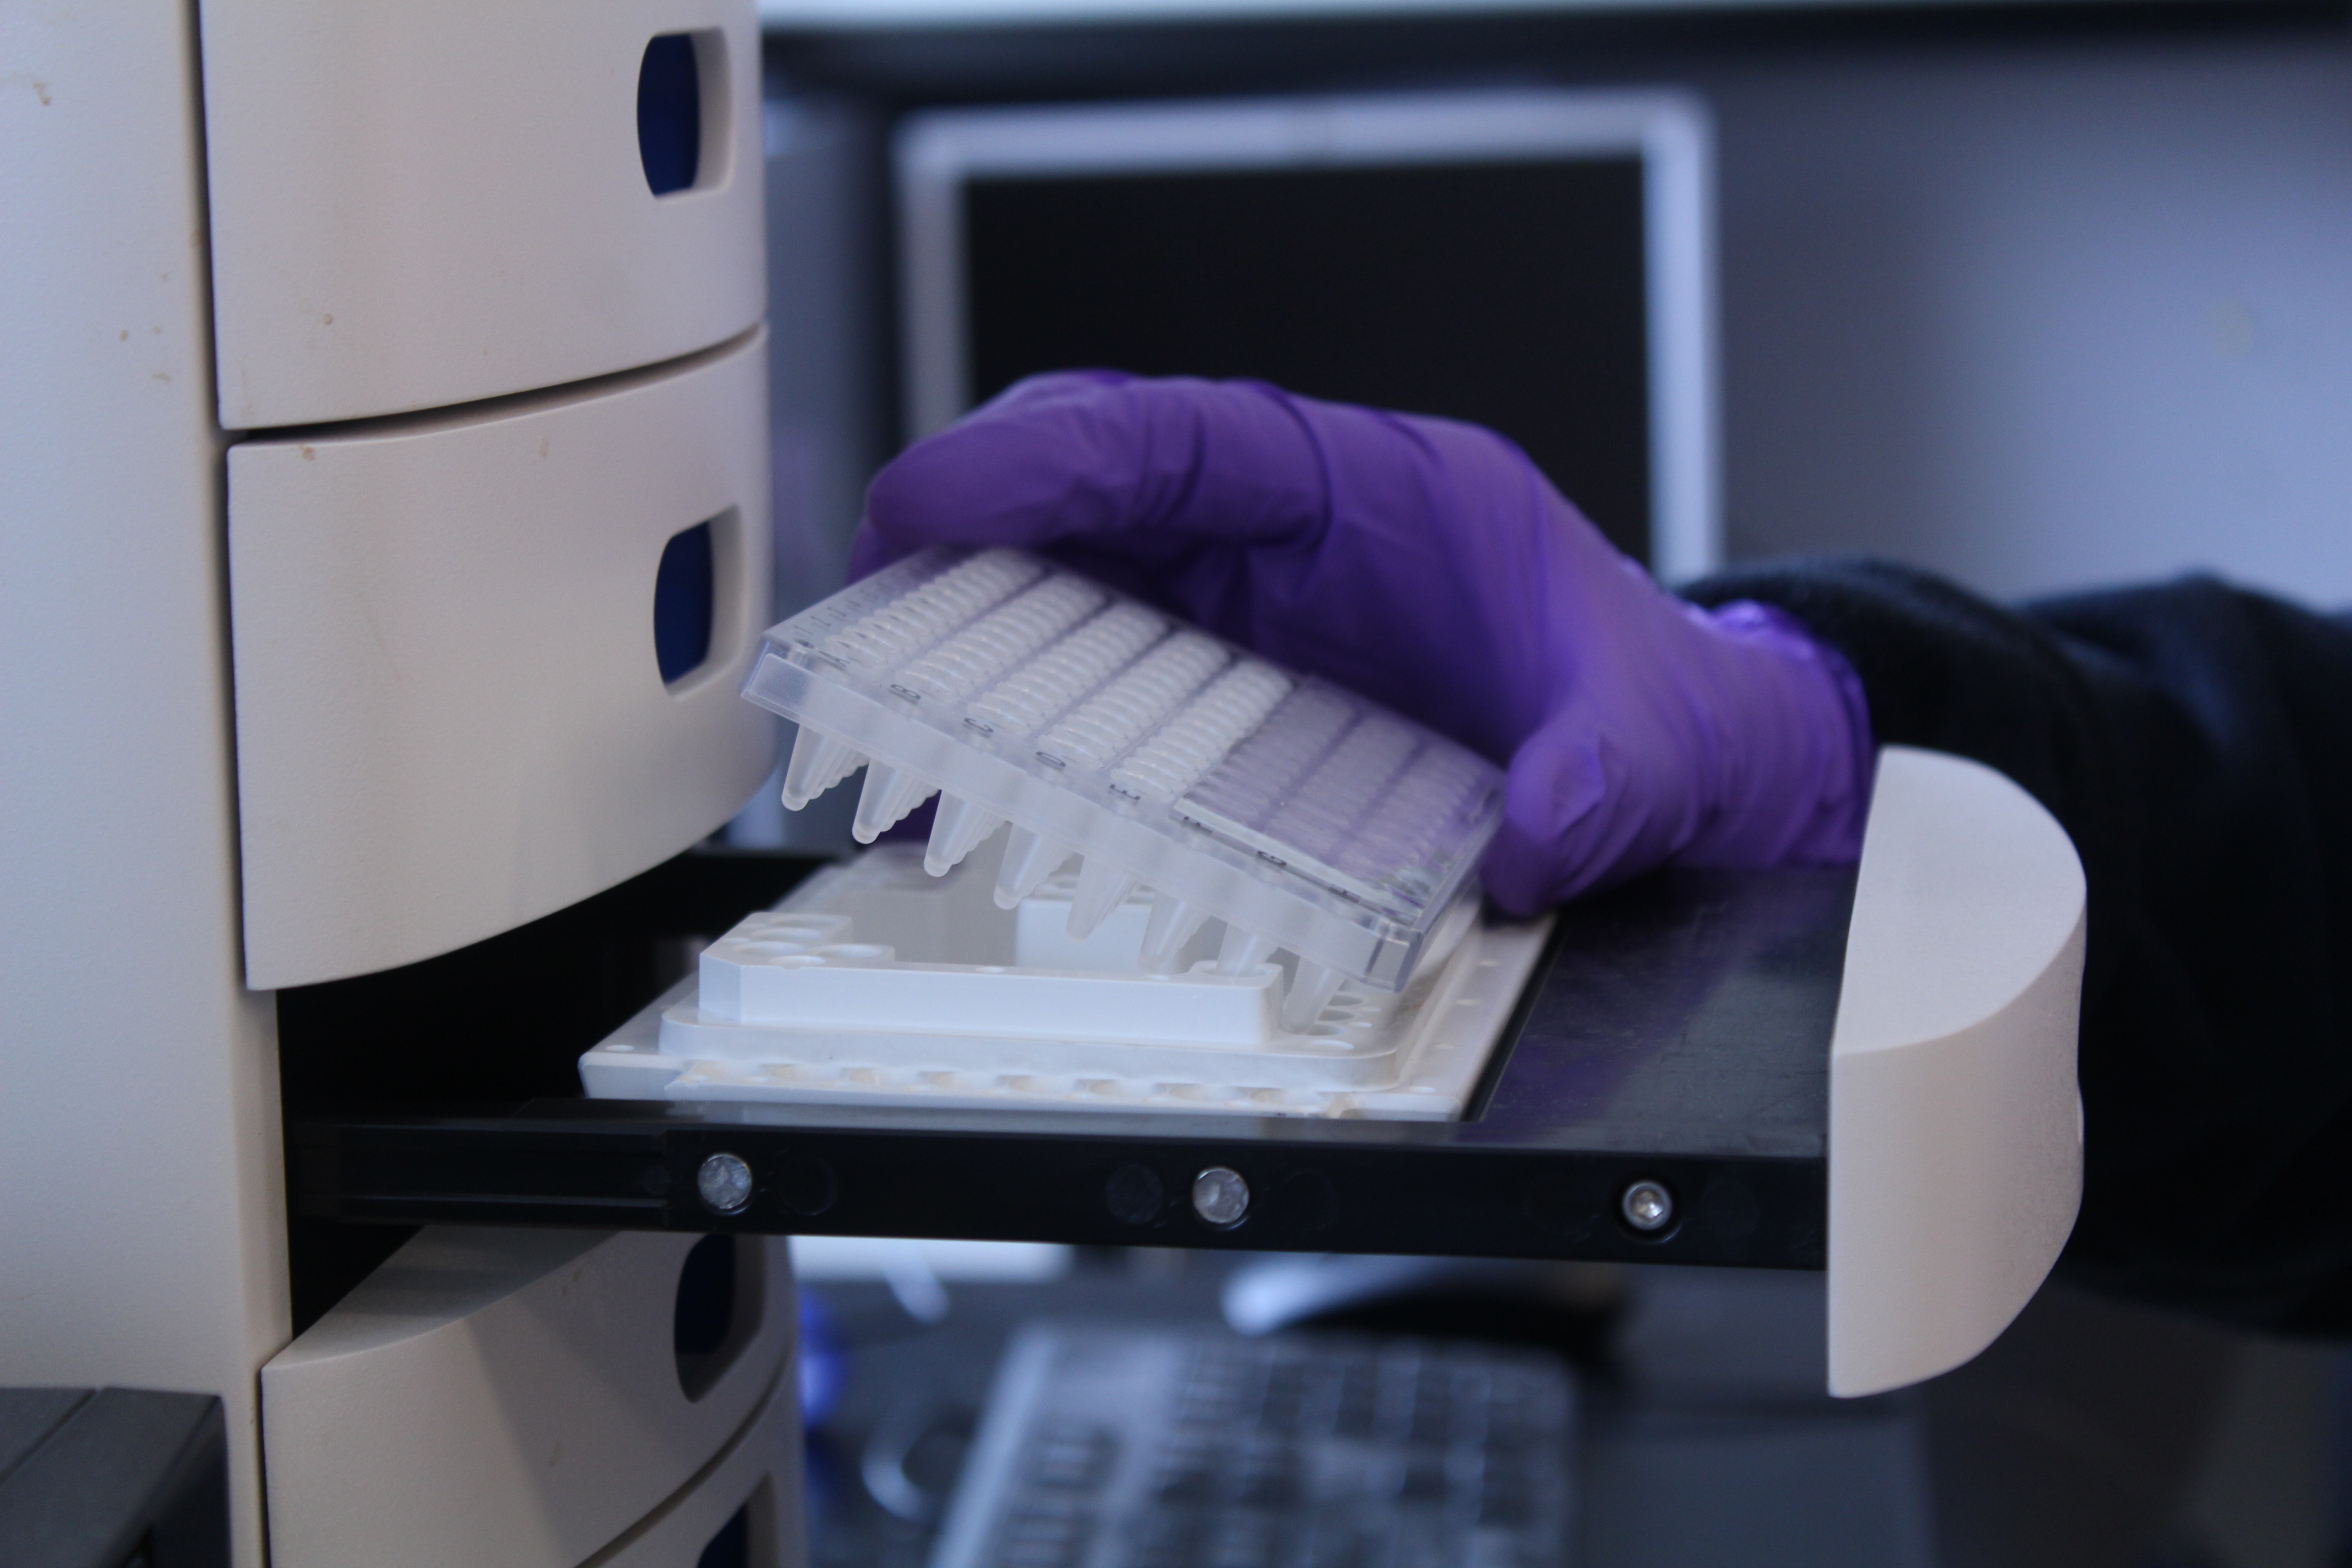 The Fragment Analyzer allows for high throughput nucleic acid fragment analysis.  The Core provides quality control services, pre- and post- sample prep.  